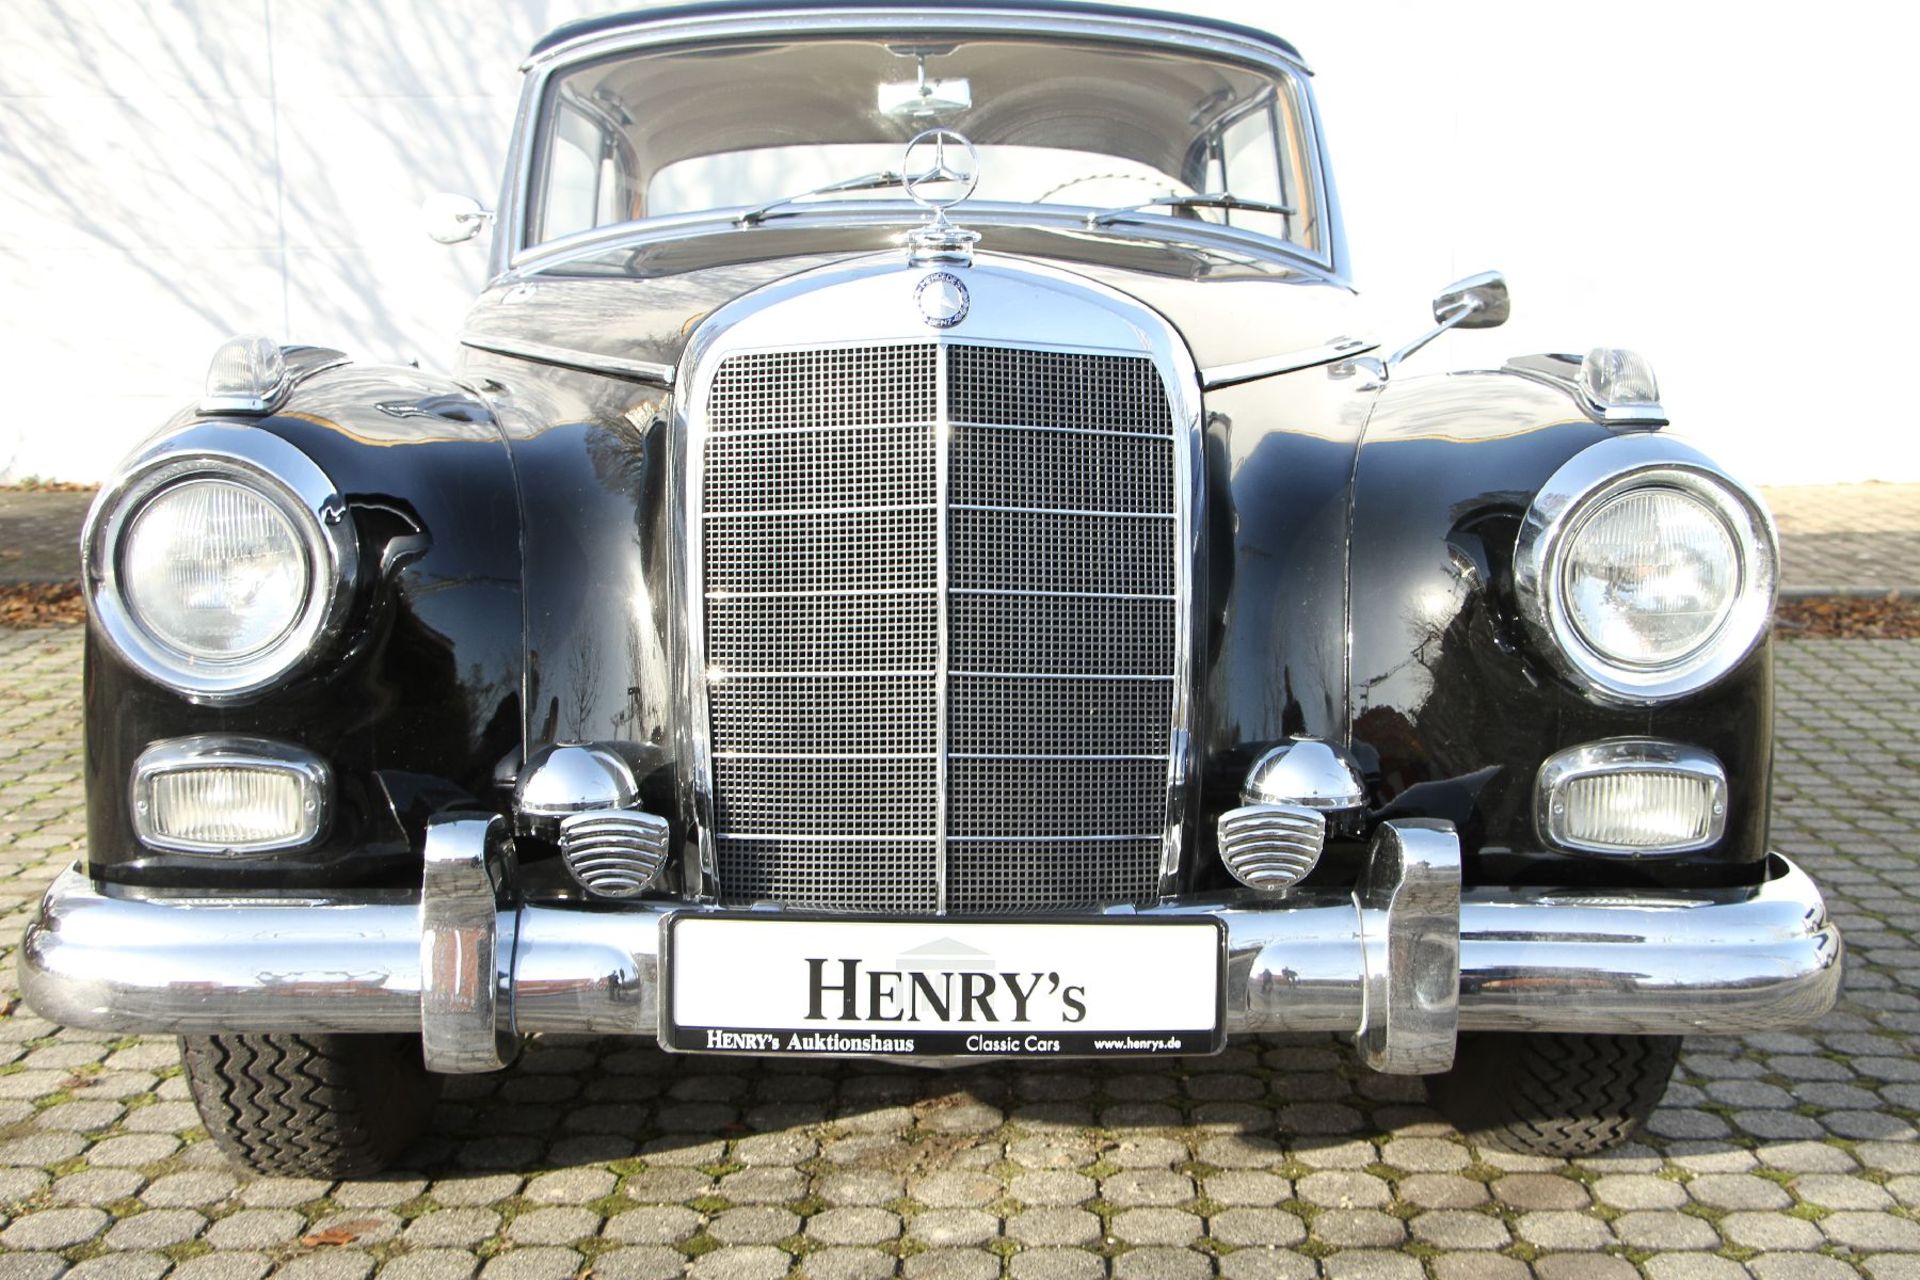 Mercedes-Benz 300d Adenauer, Chassis Number: 8500228, first registered 07/1958, two owners within - Bild 14 aus 16